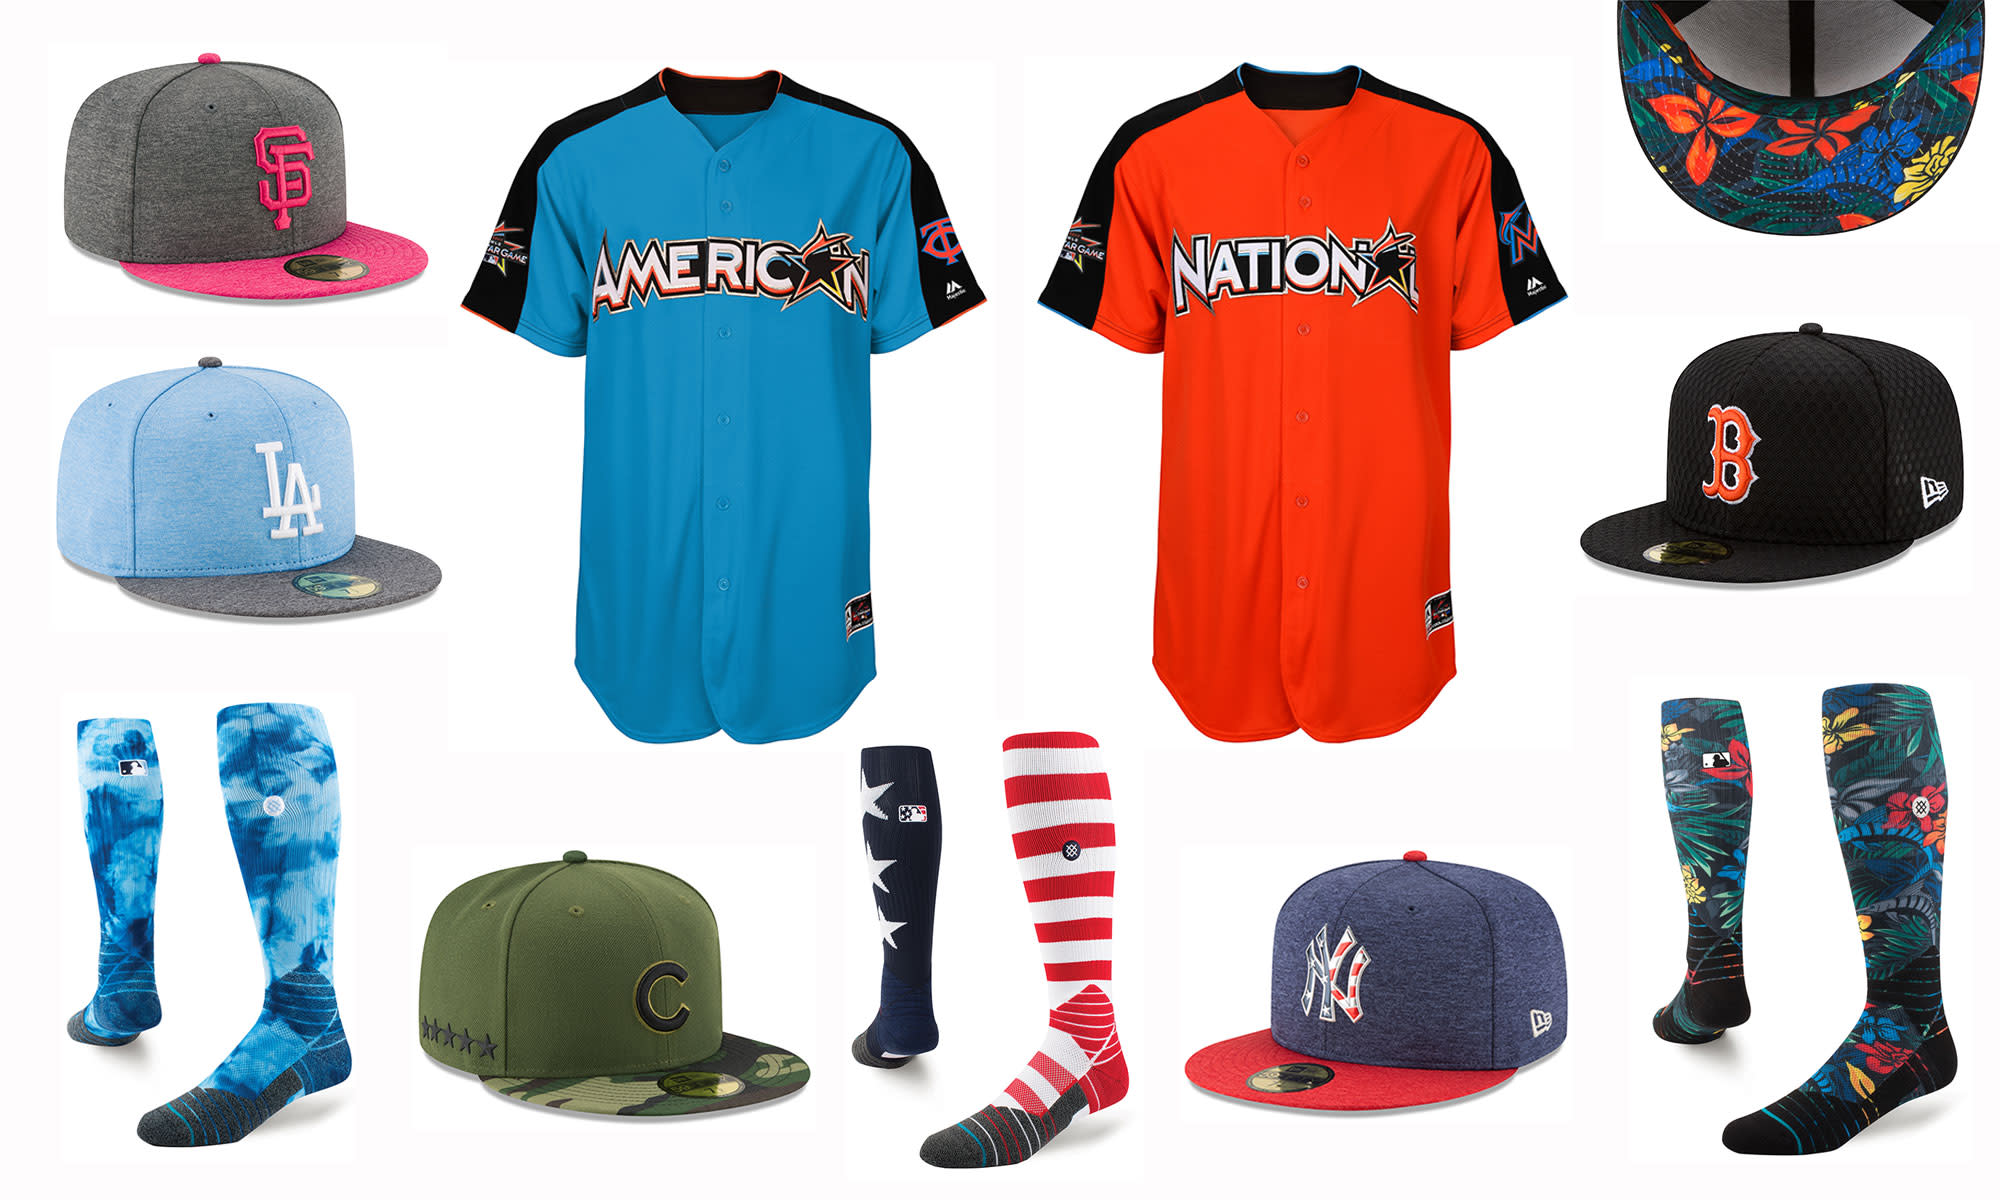 MLB unveils colorful new uniforms for AllStar game, Fourth of July